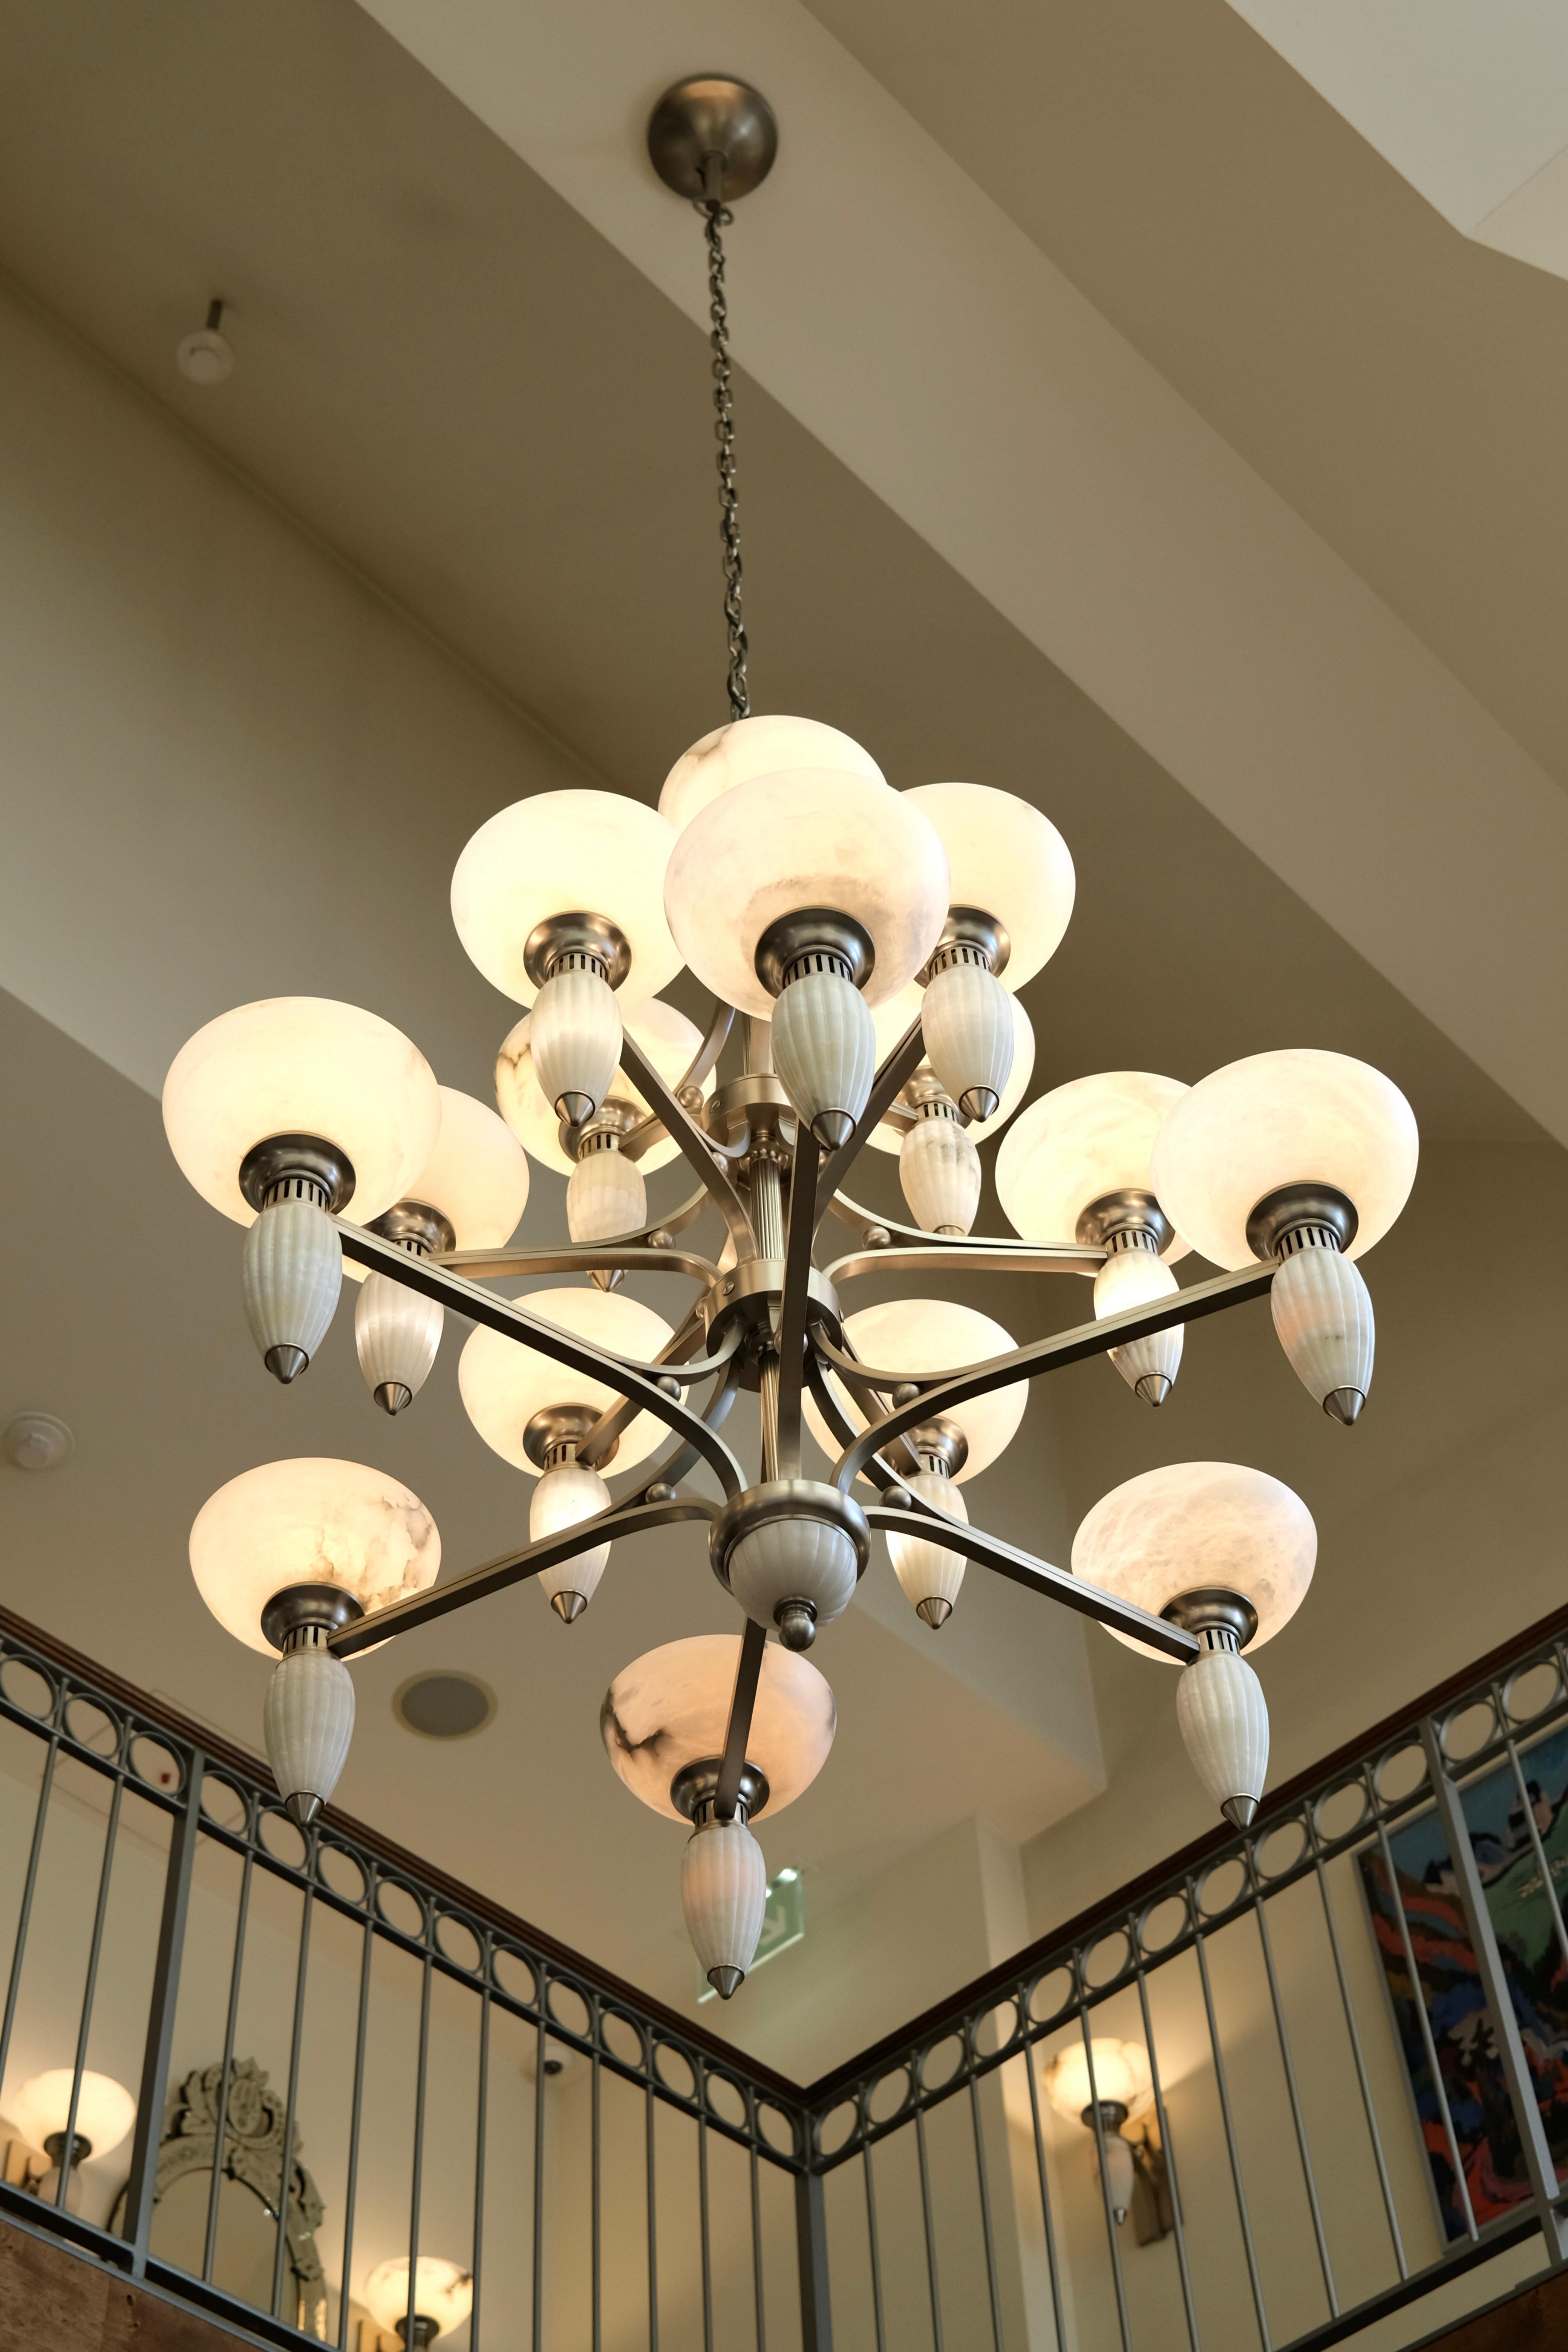 Spanish 15-Arm Art Deco Style Chandelier with Alabaster Bowls and Illuminated Cones For Sale